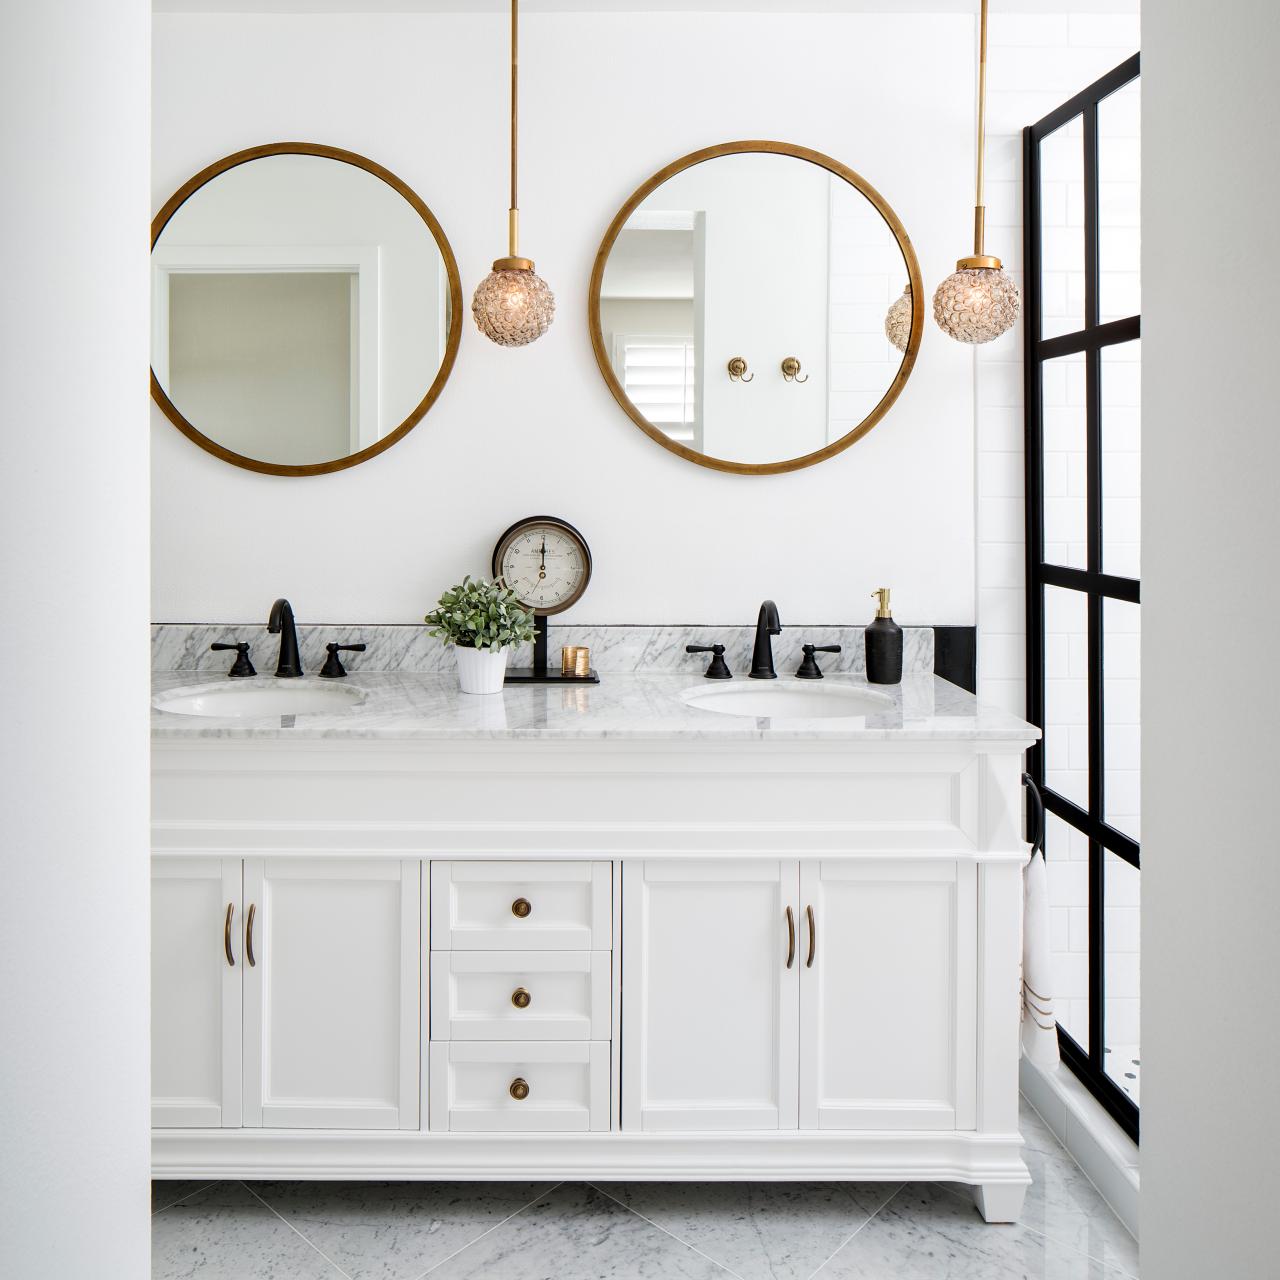 10 Powder Room Mirrors Ideas For Your, Do You Need A Special Mirror For Bathroom